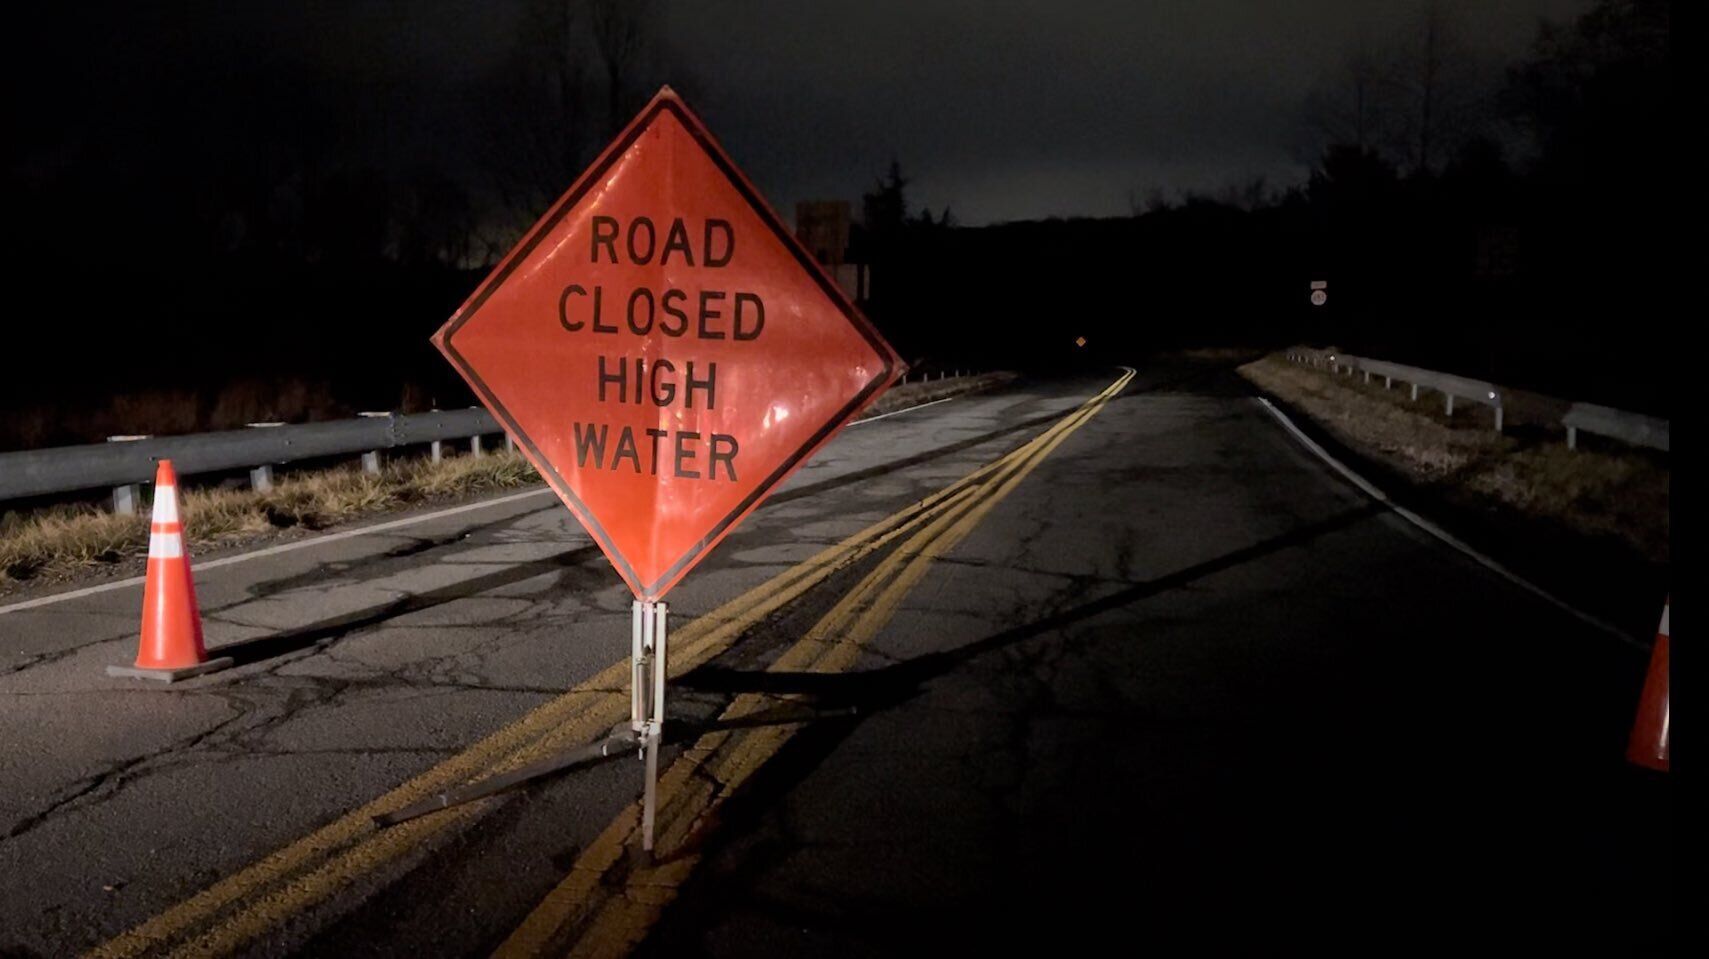 Road Closed High Water sign